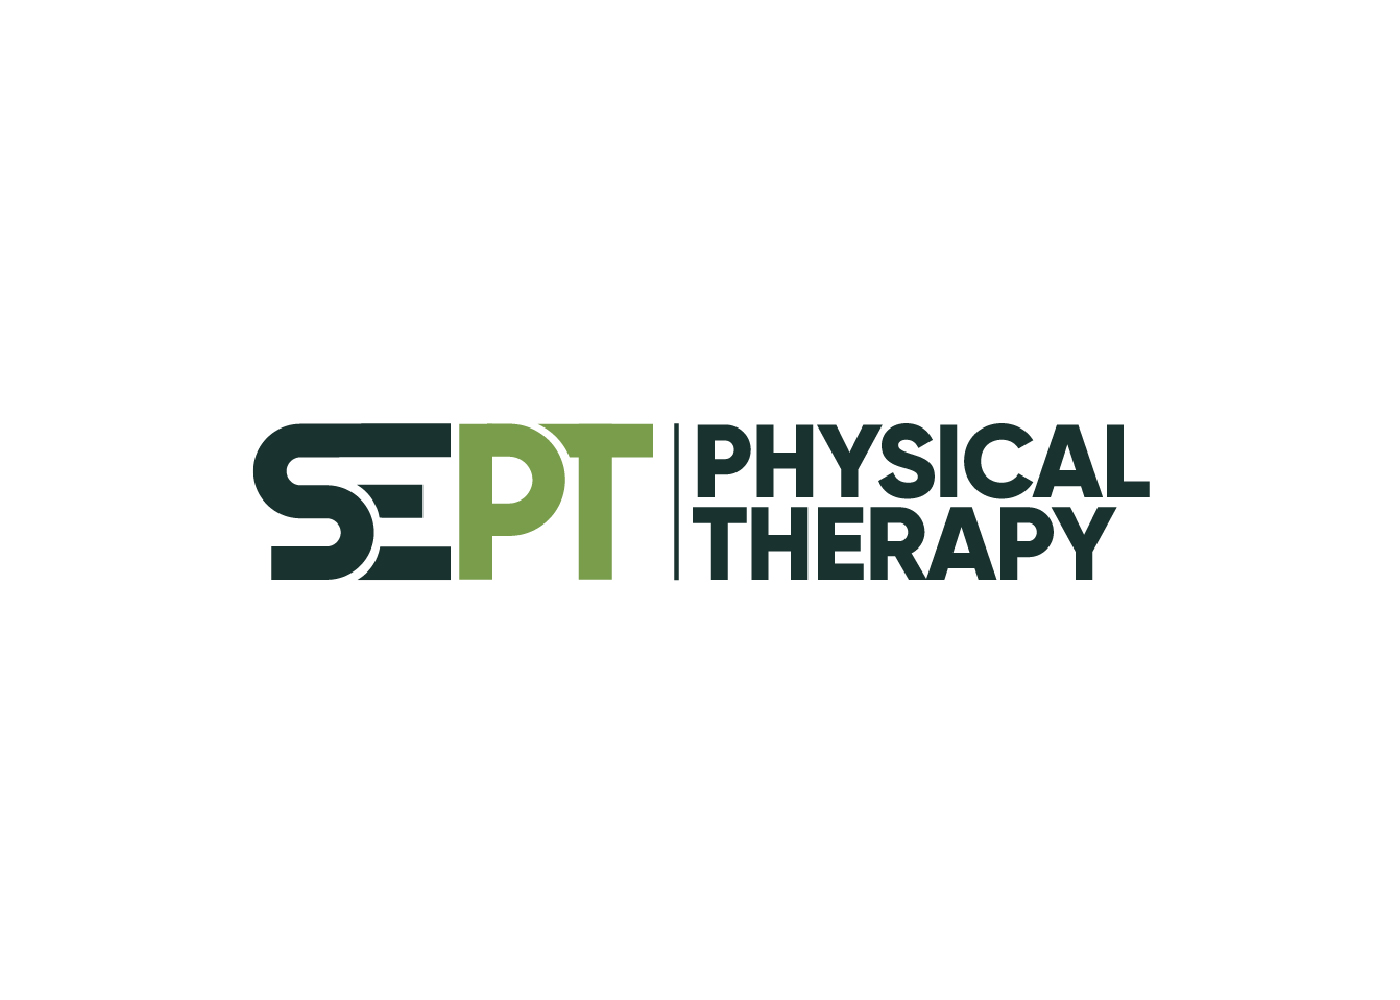 SEPT Physical Therapy